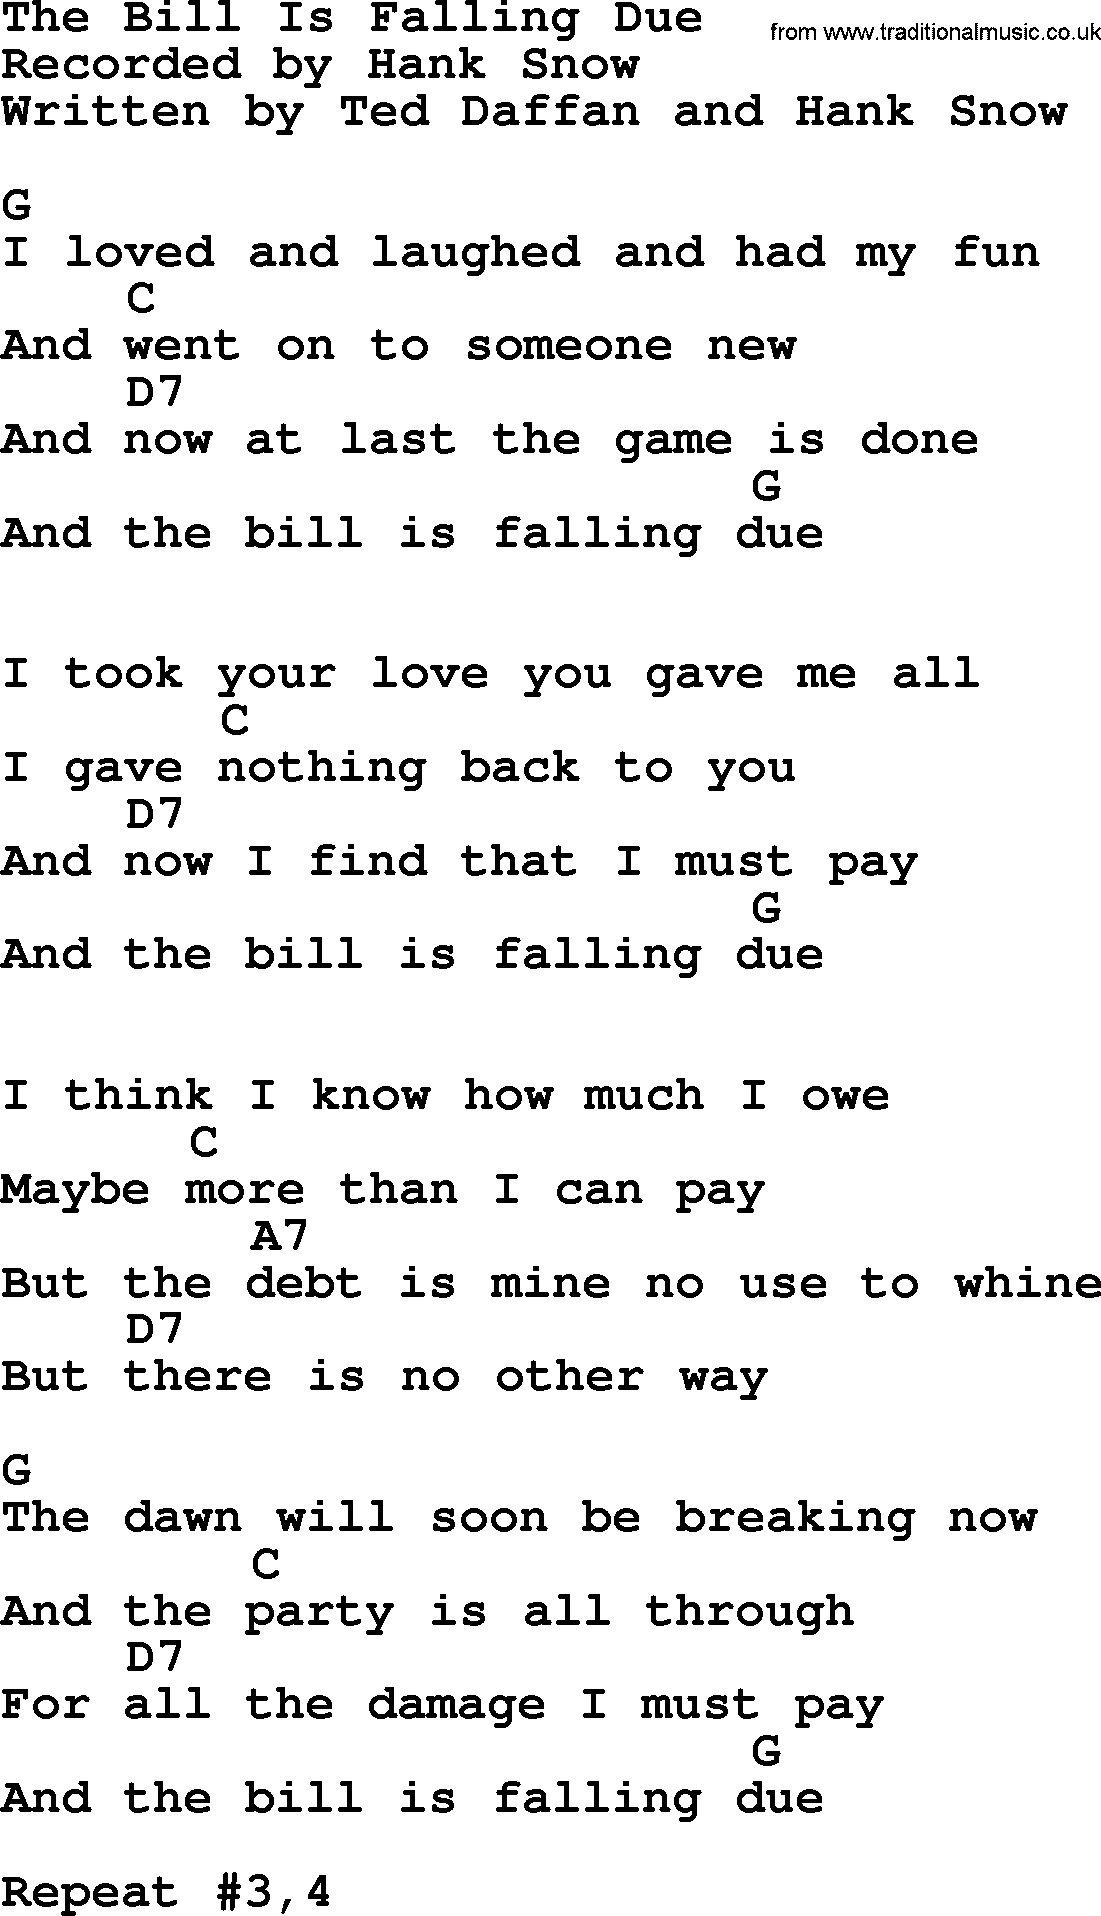 George Jones song: The Bill Is Falling Due, lyrics and chords